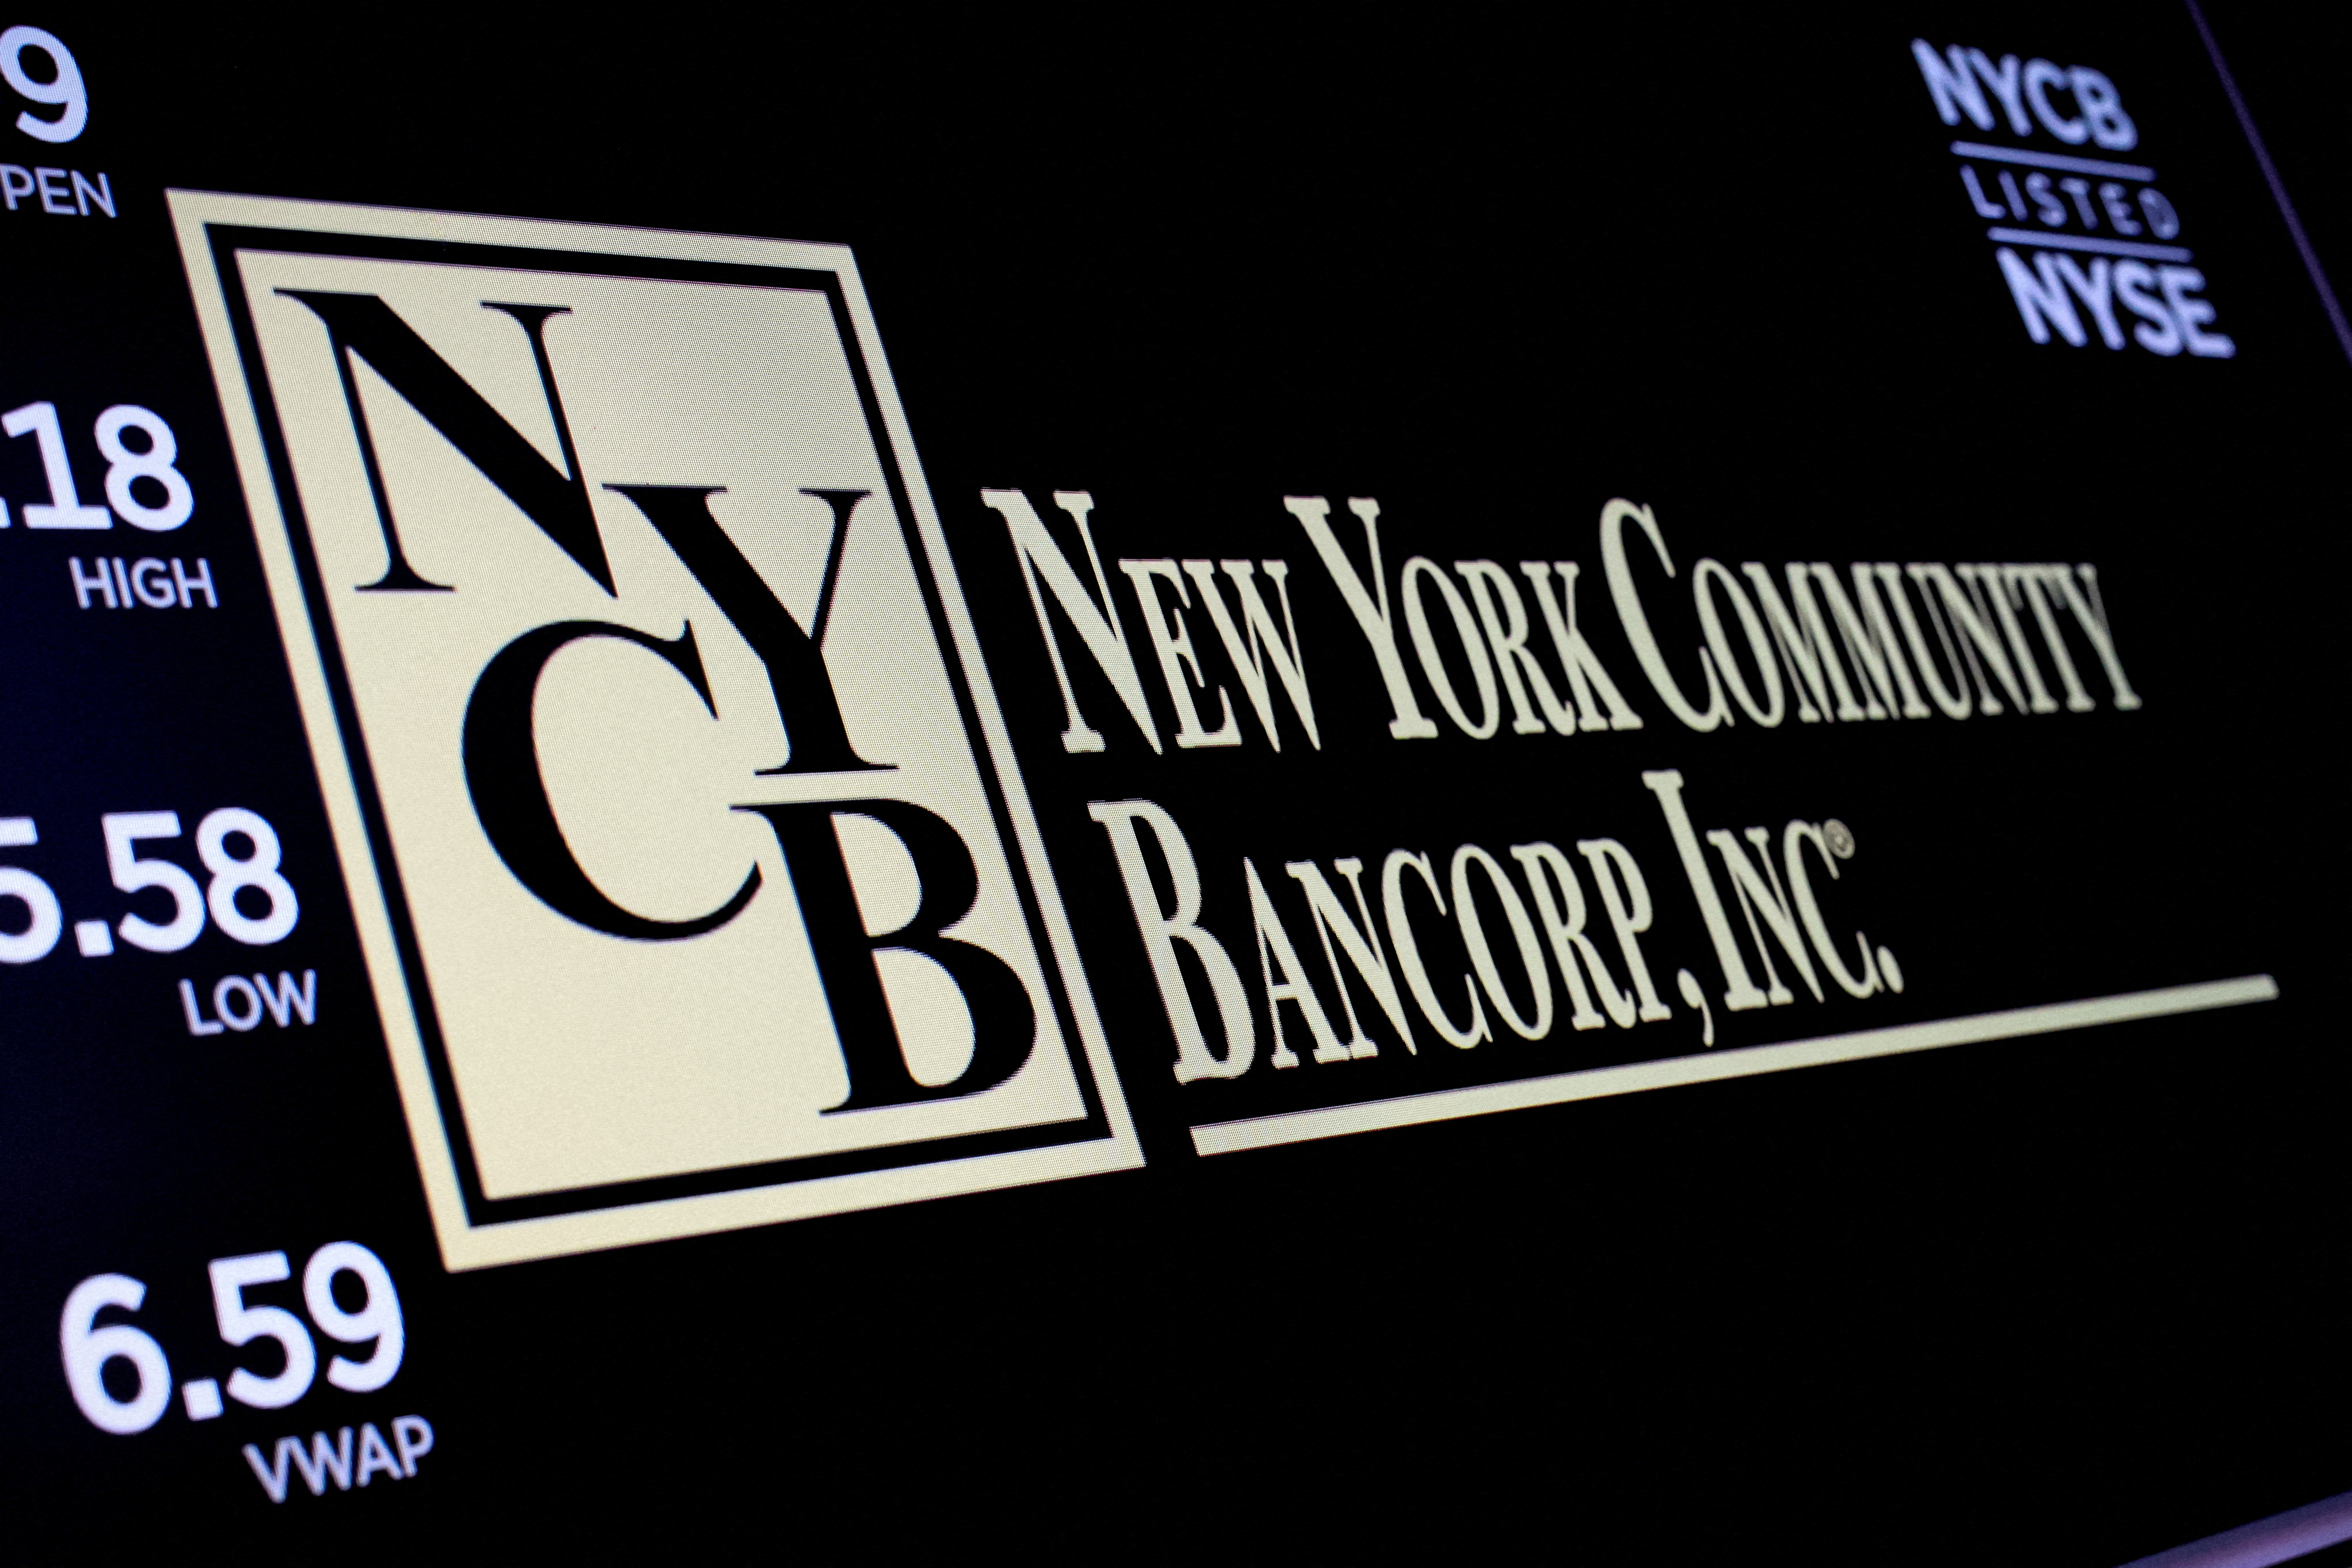 Embattled lender NYCB secures $1 bln investment from cohort including  Mnuchin's firm